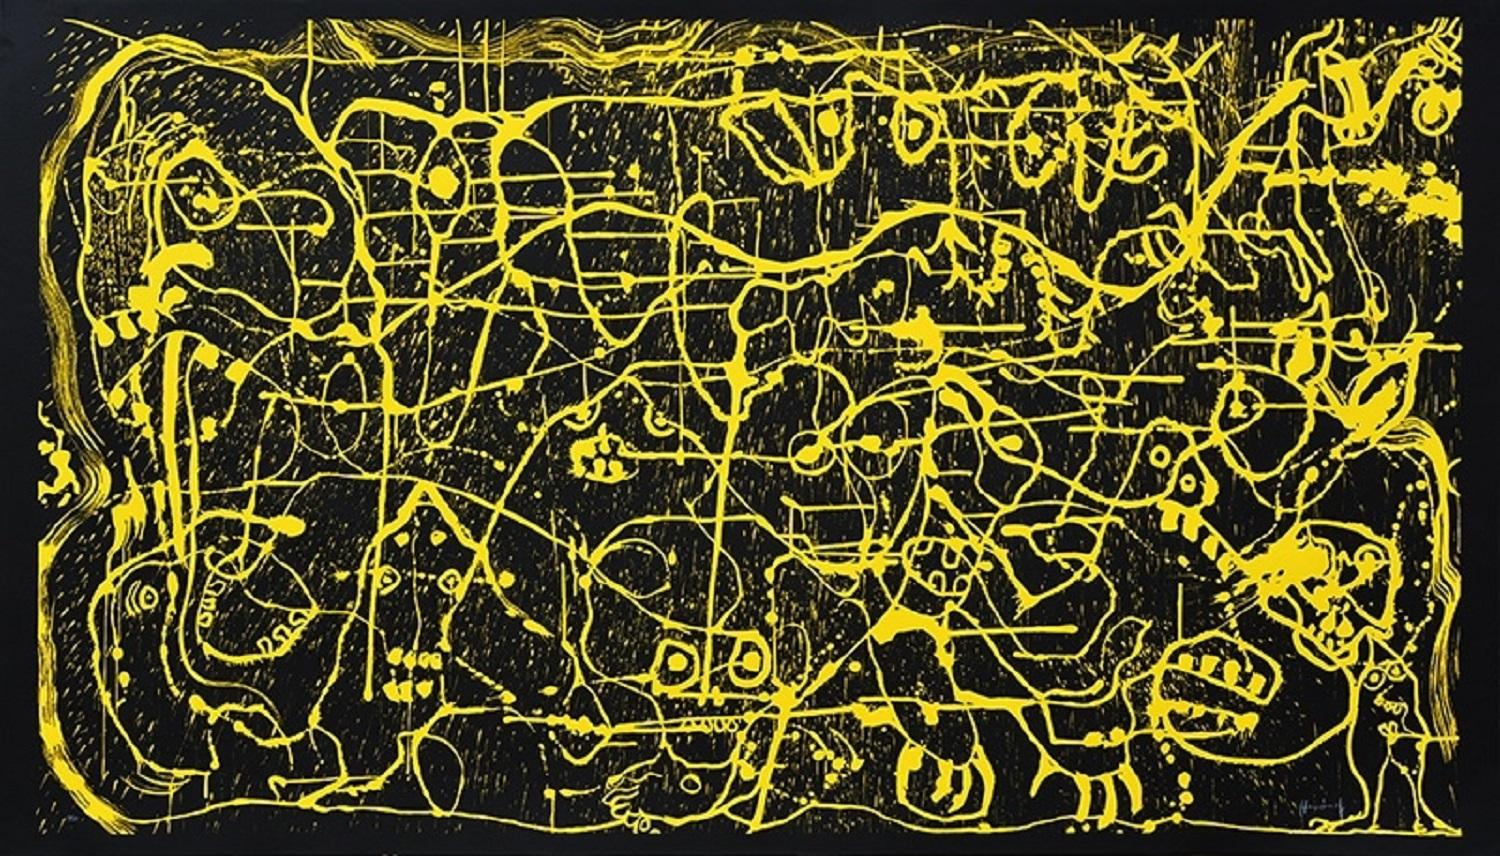 Sergio Hernández (Mexico, 1957)
'Untitled', 2016
woodcut on paper
46.9 x 82.7 in. (119 x 210 cm.)
Edition of 30
Signed by the author in pencil, lower right.
Publisher Taller LSH, Mexico























